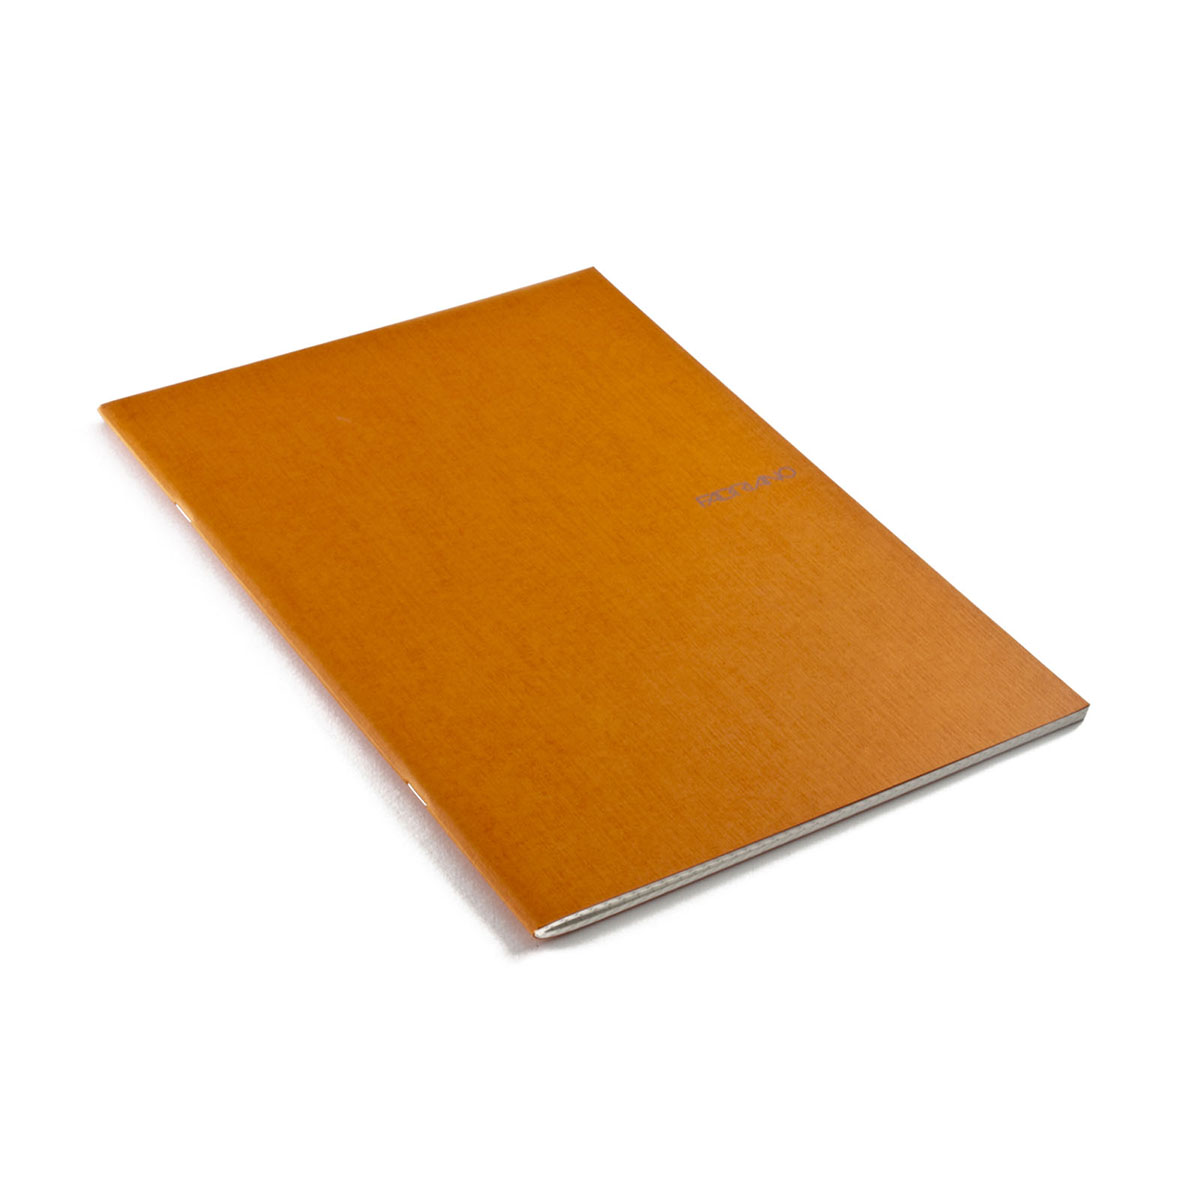 Sketchbook: Two Tone Orange 8x10 - BLANK JOURNAL WITH NO LINES - Journal  notebook with unlined pages for drawing and writing on blank paper